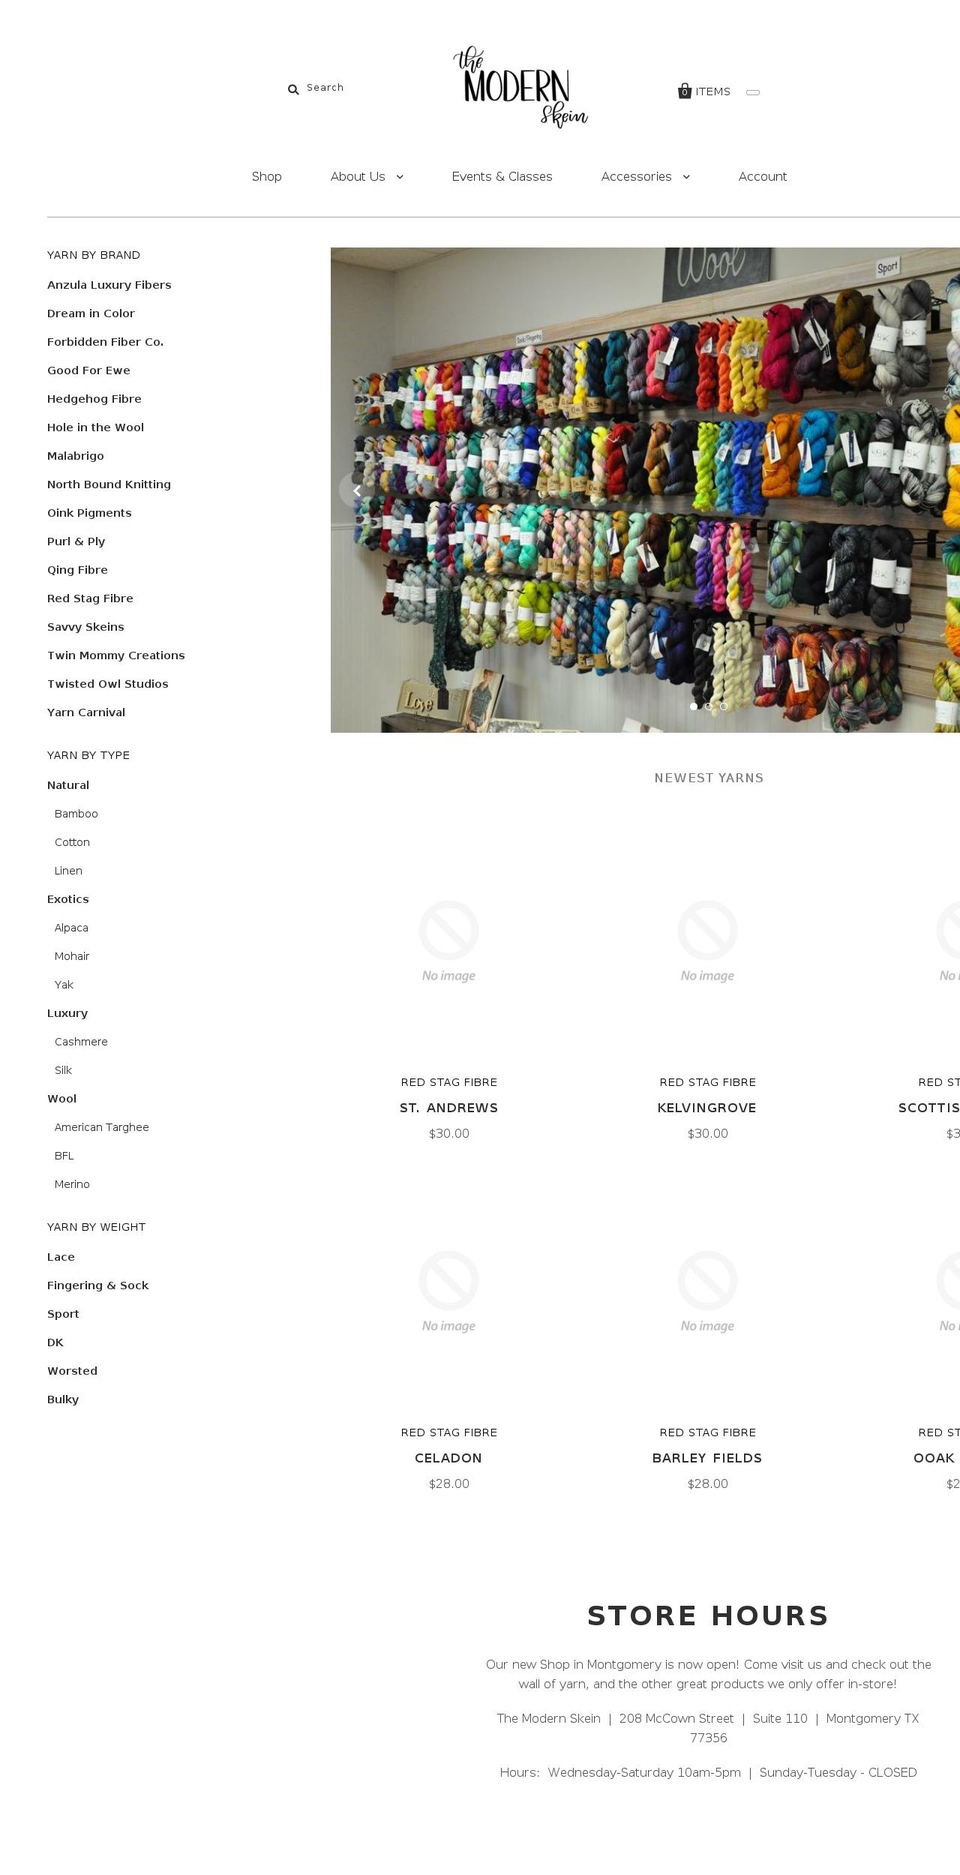 Superstore-v Shopify theme site example themodernskein.com